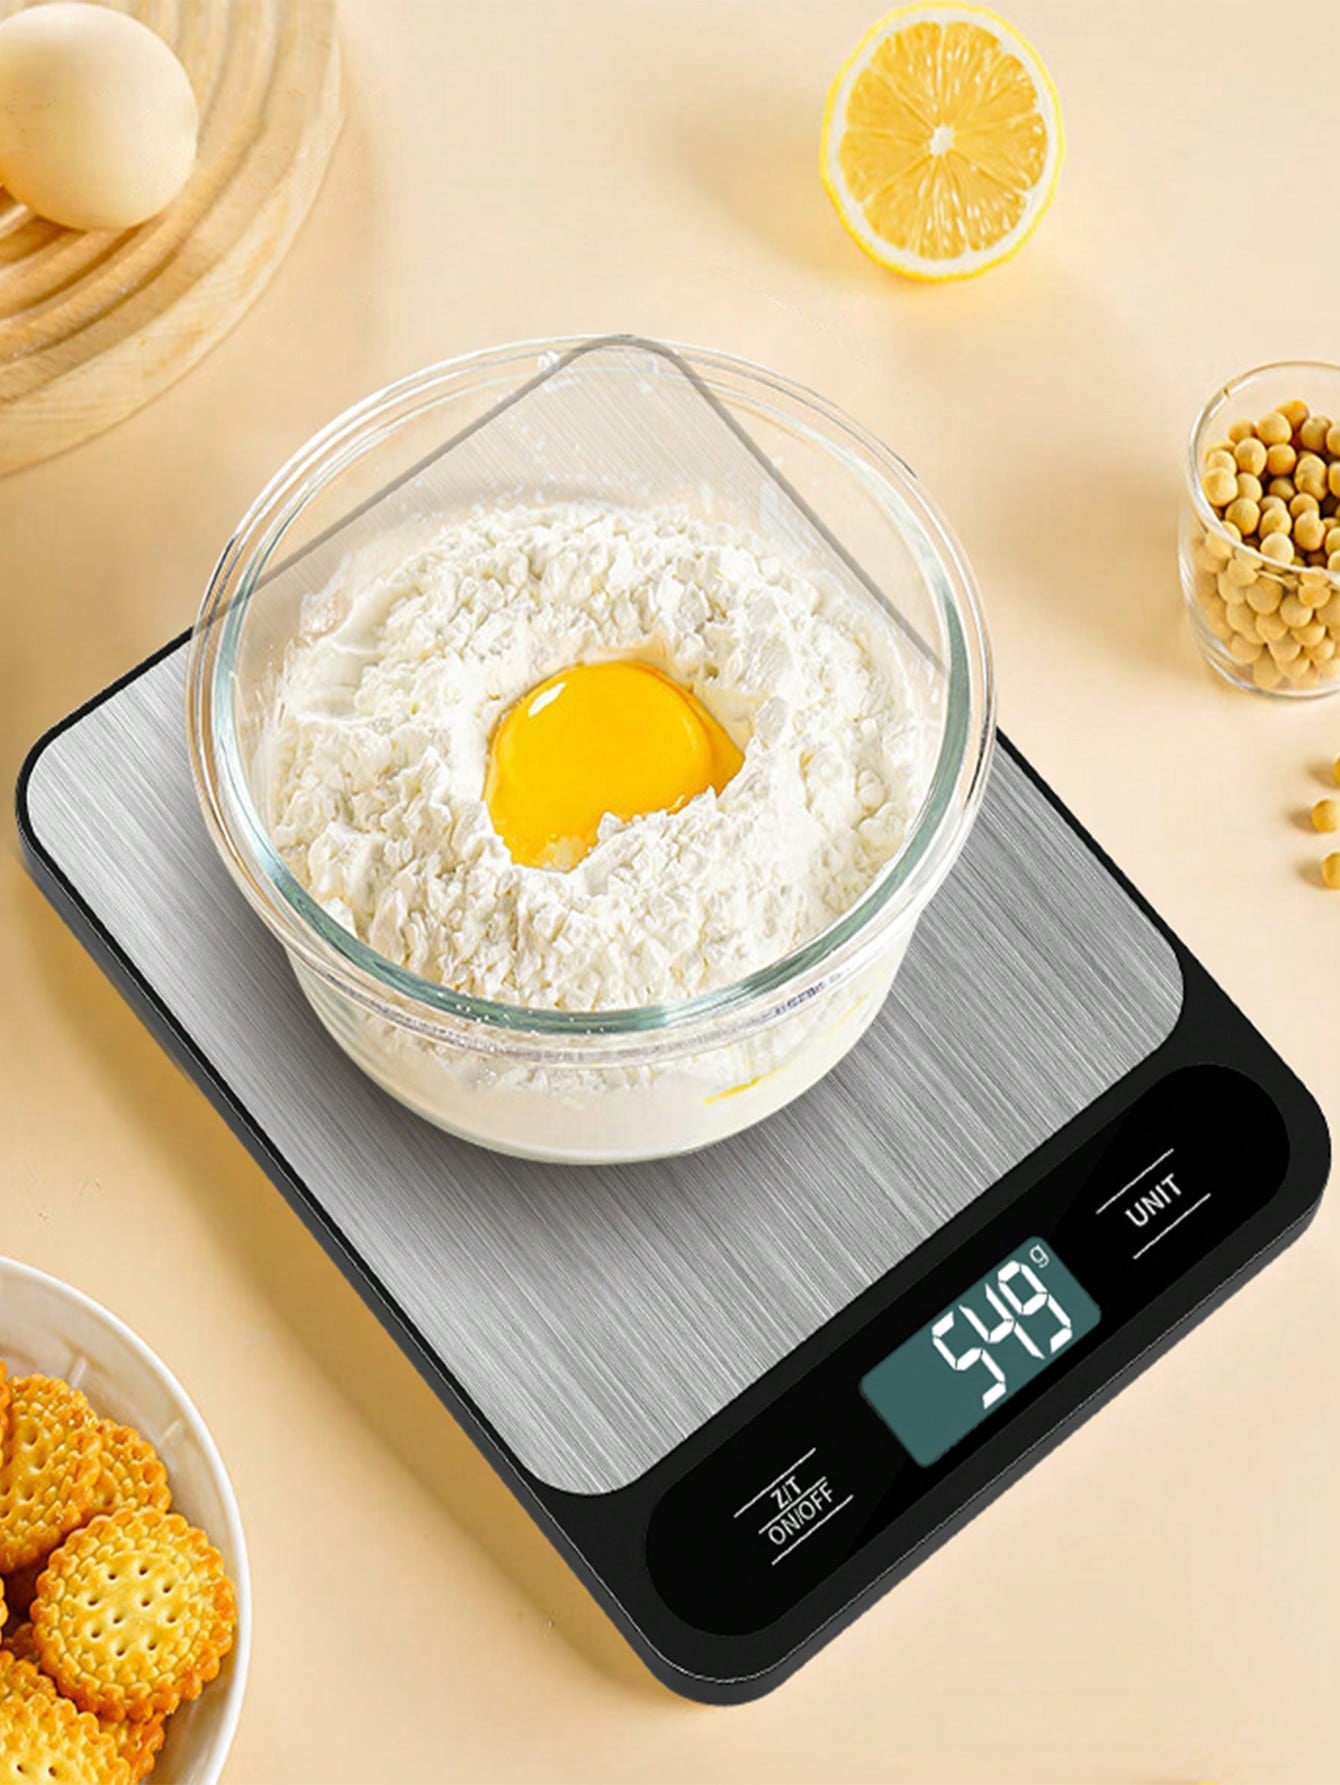 Kitchen Scale Bakery Electronic Scale Household Small Electronic